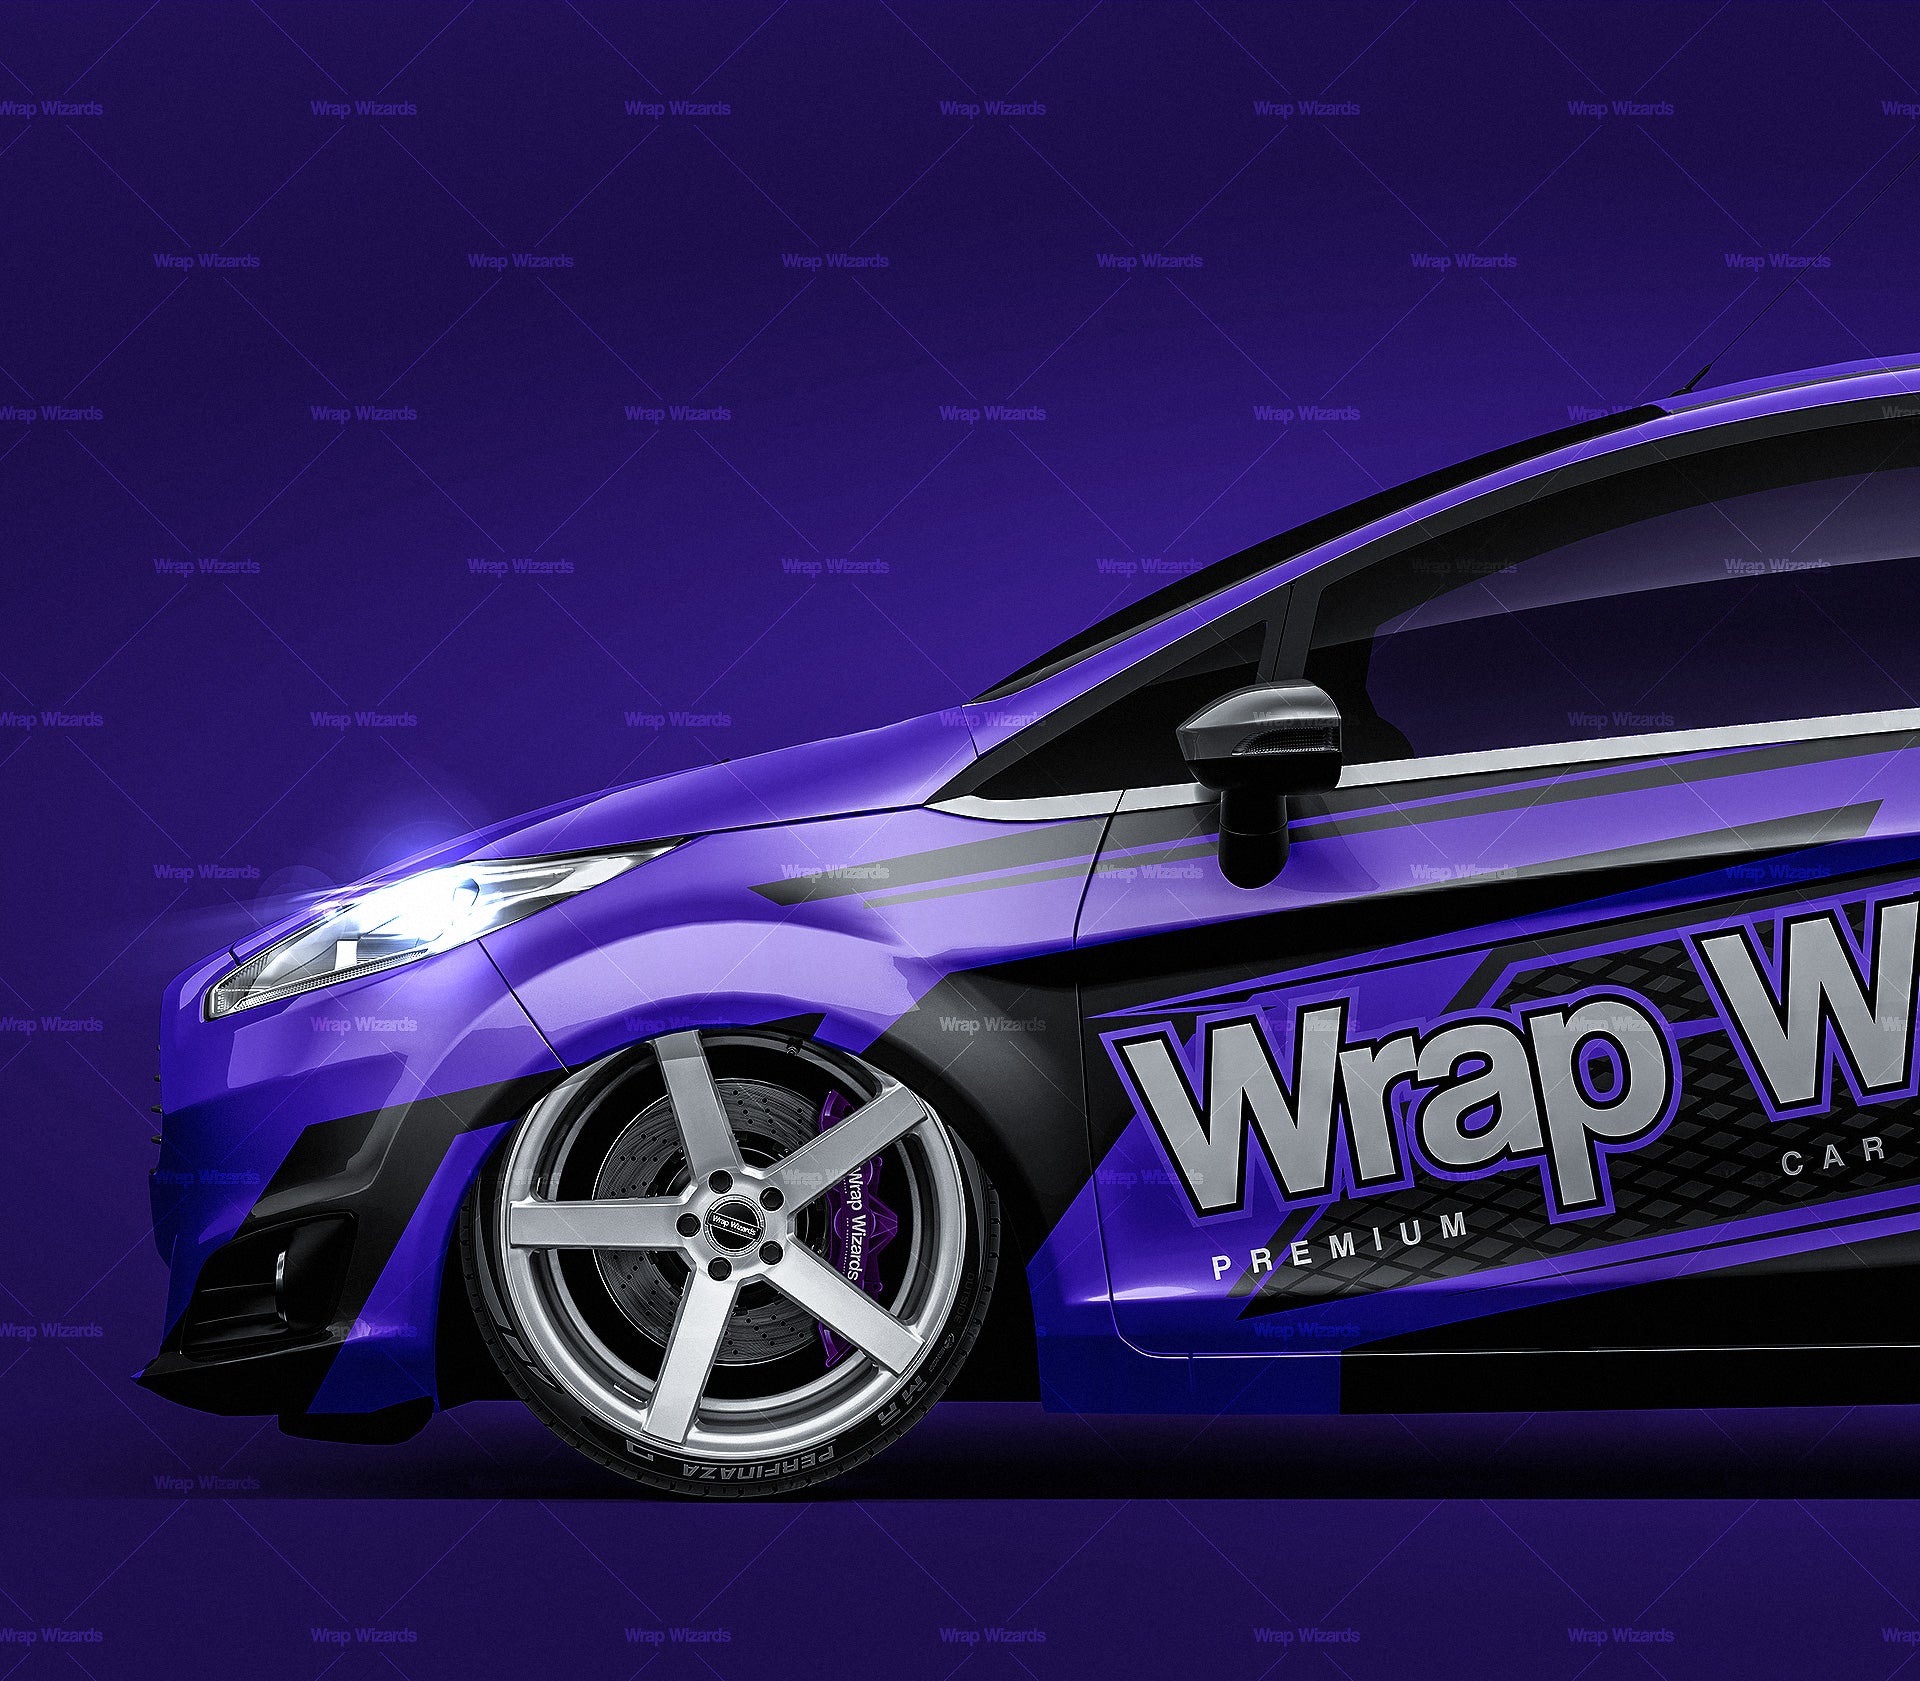 Ford Fiesta 3door 2013 glossy finish - all sides Car Mockup Template.psd